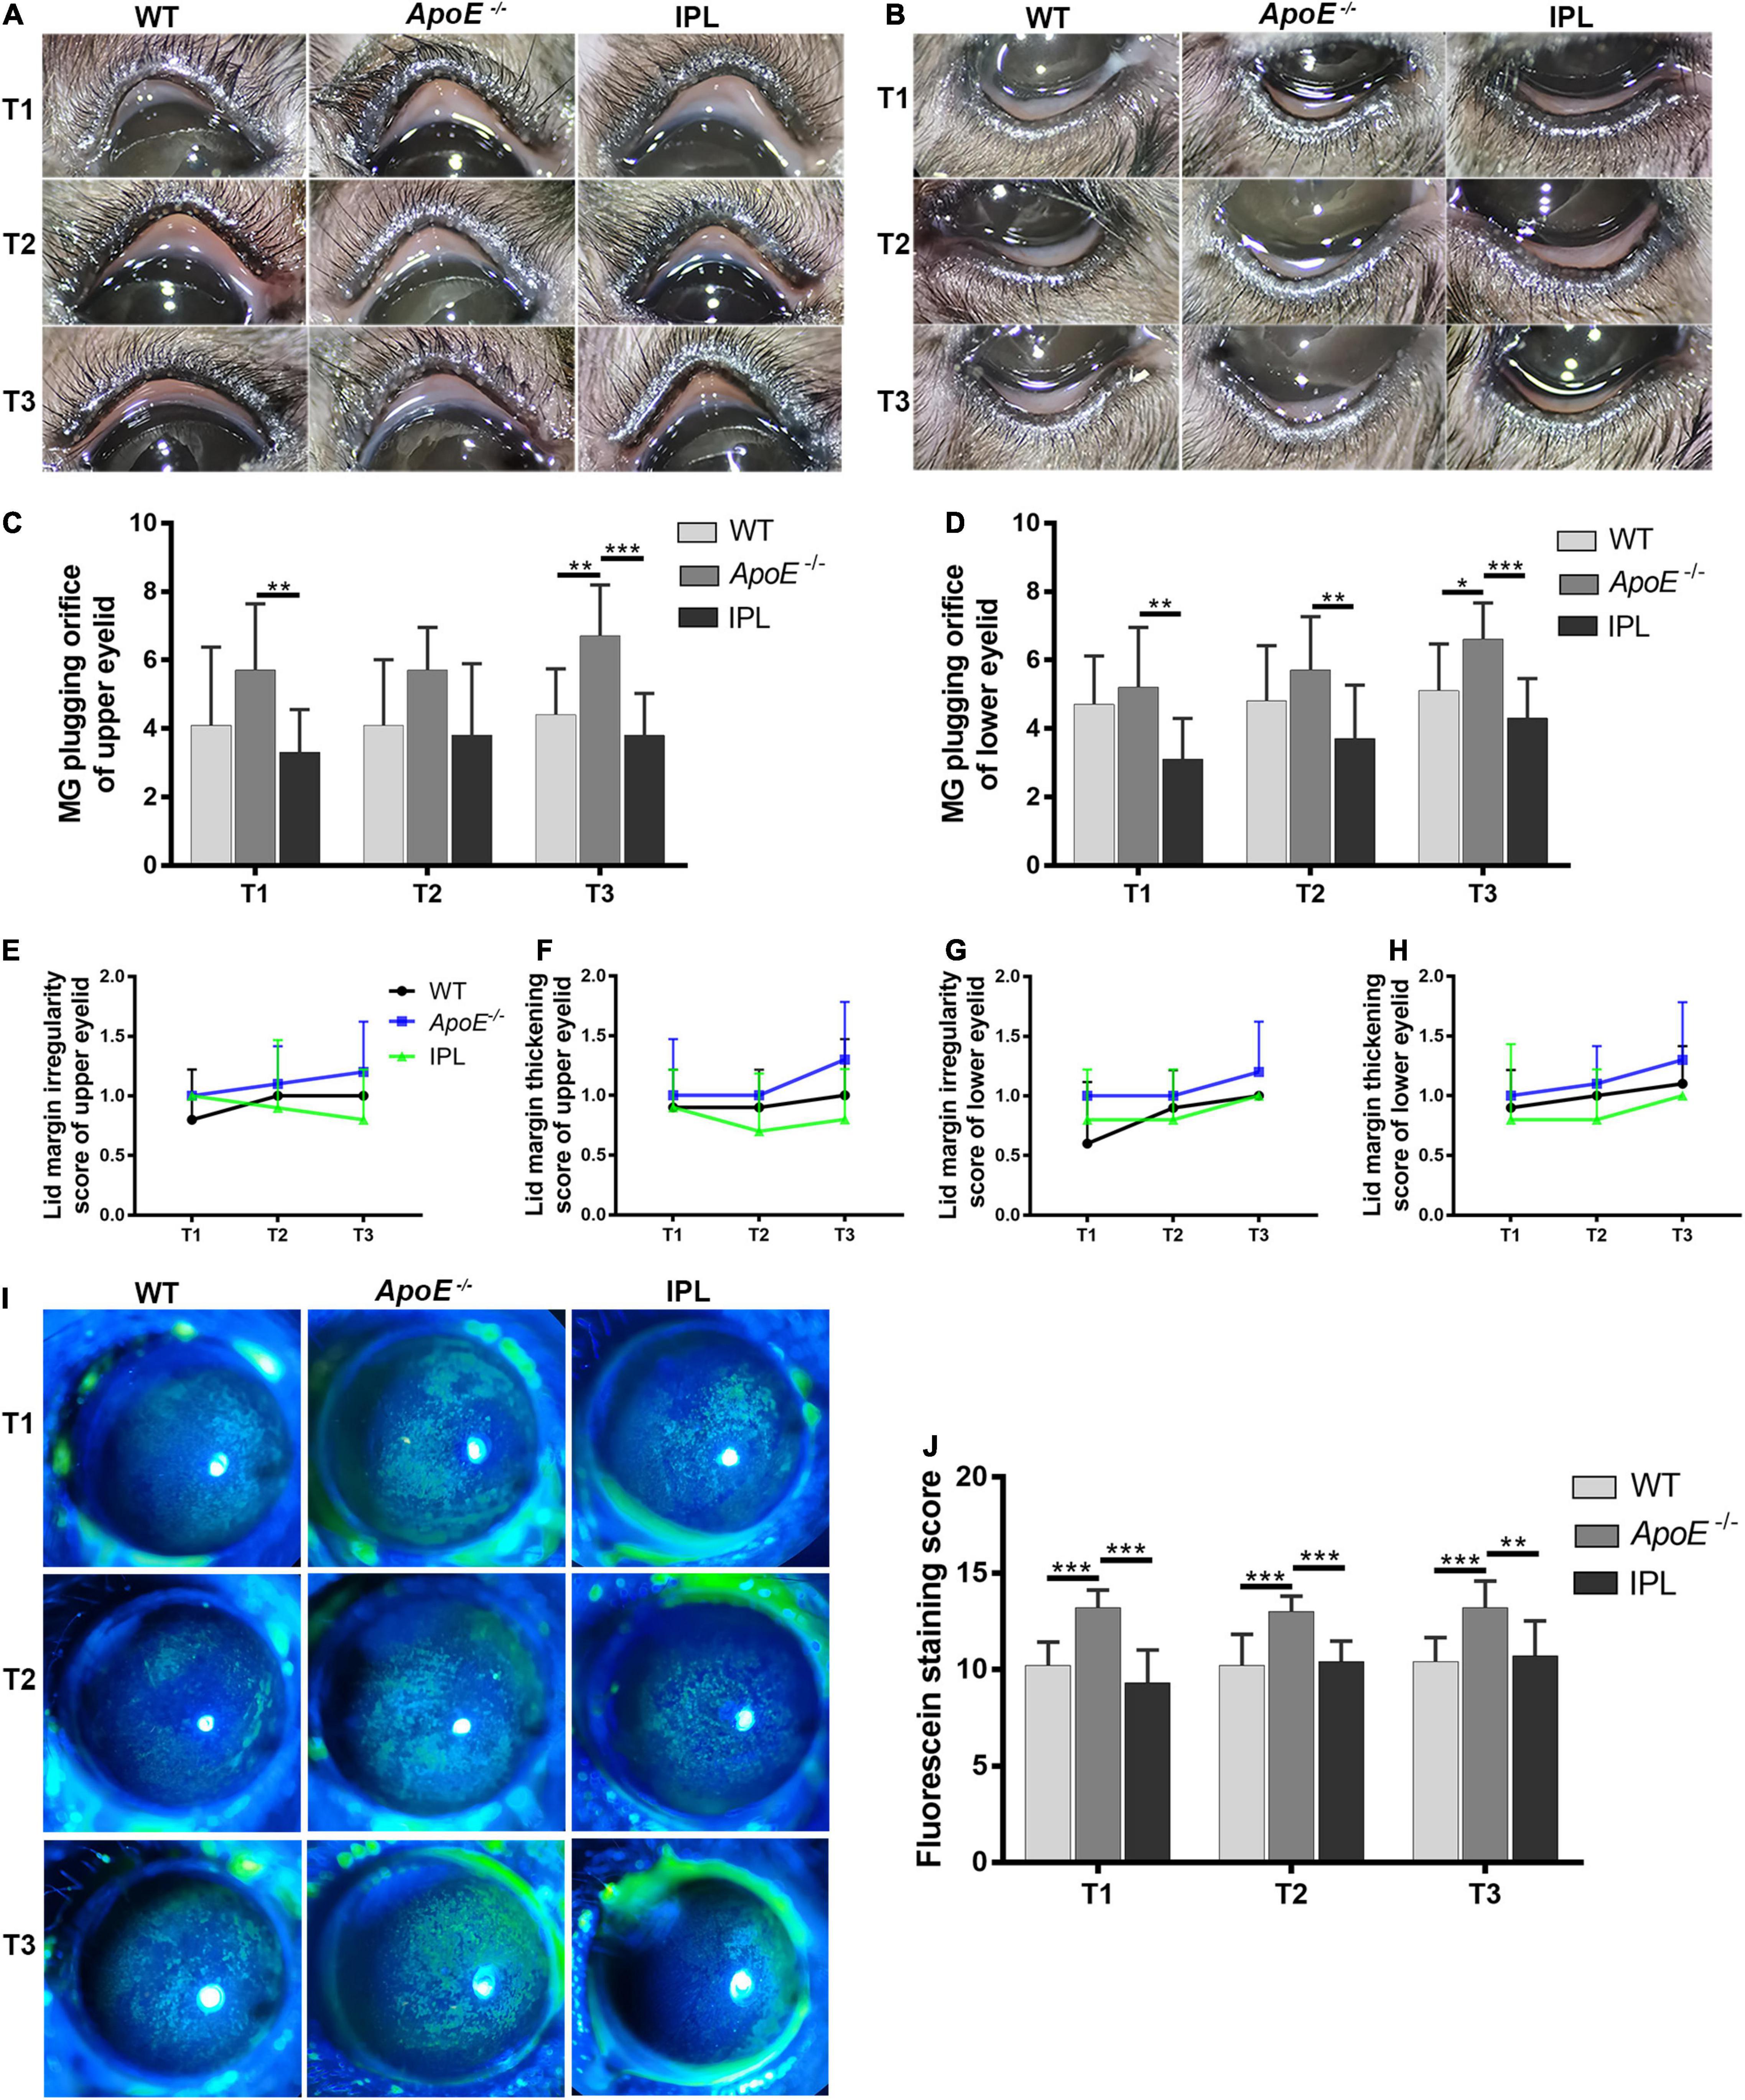 Frontiers Indirect Application of Intense Pulsed Light Induces Therapeutic Effects on Experimental Murine Meibomian Gland Dysfunction image